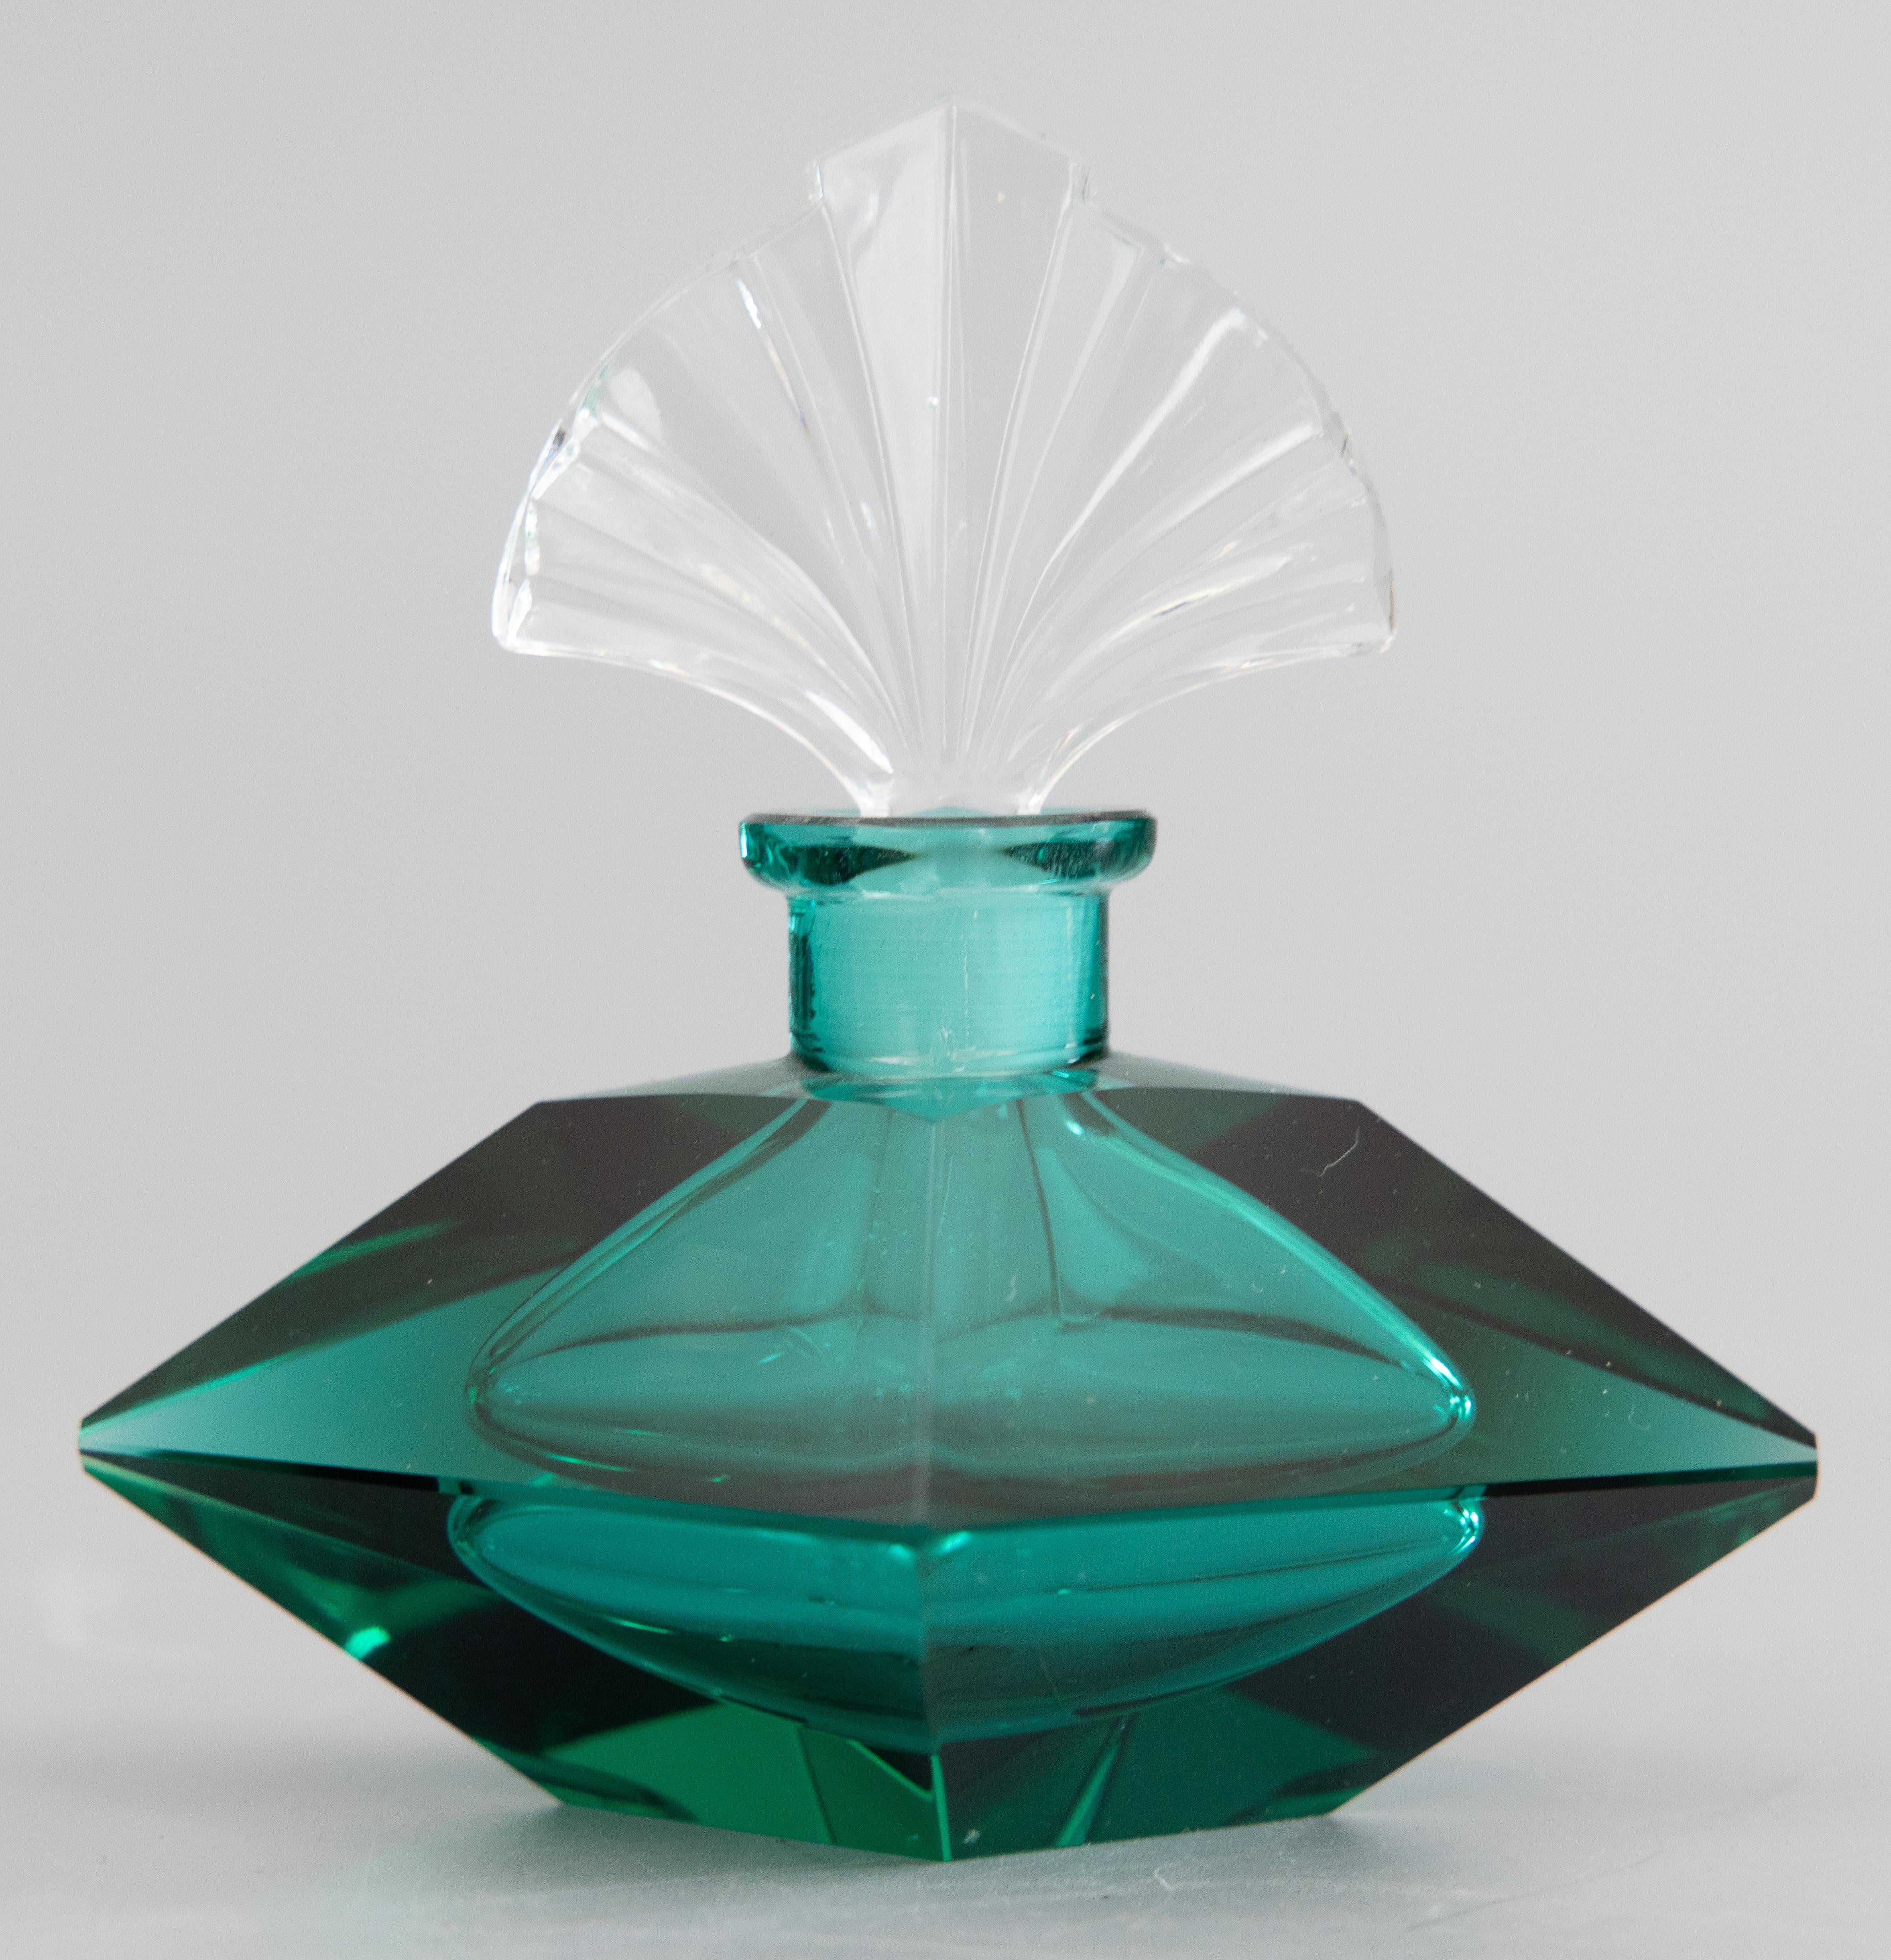 A stunning vintage Art Deco Italian Murano glass perfume cologne bottle with a fan shaped stopper. This stylish perfume bottle is a gorgeous translucent emerald green reminiscent of Fitzgerald's novel 